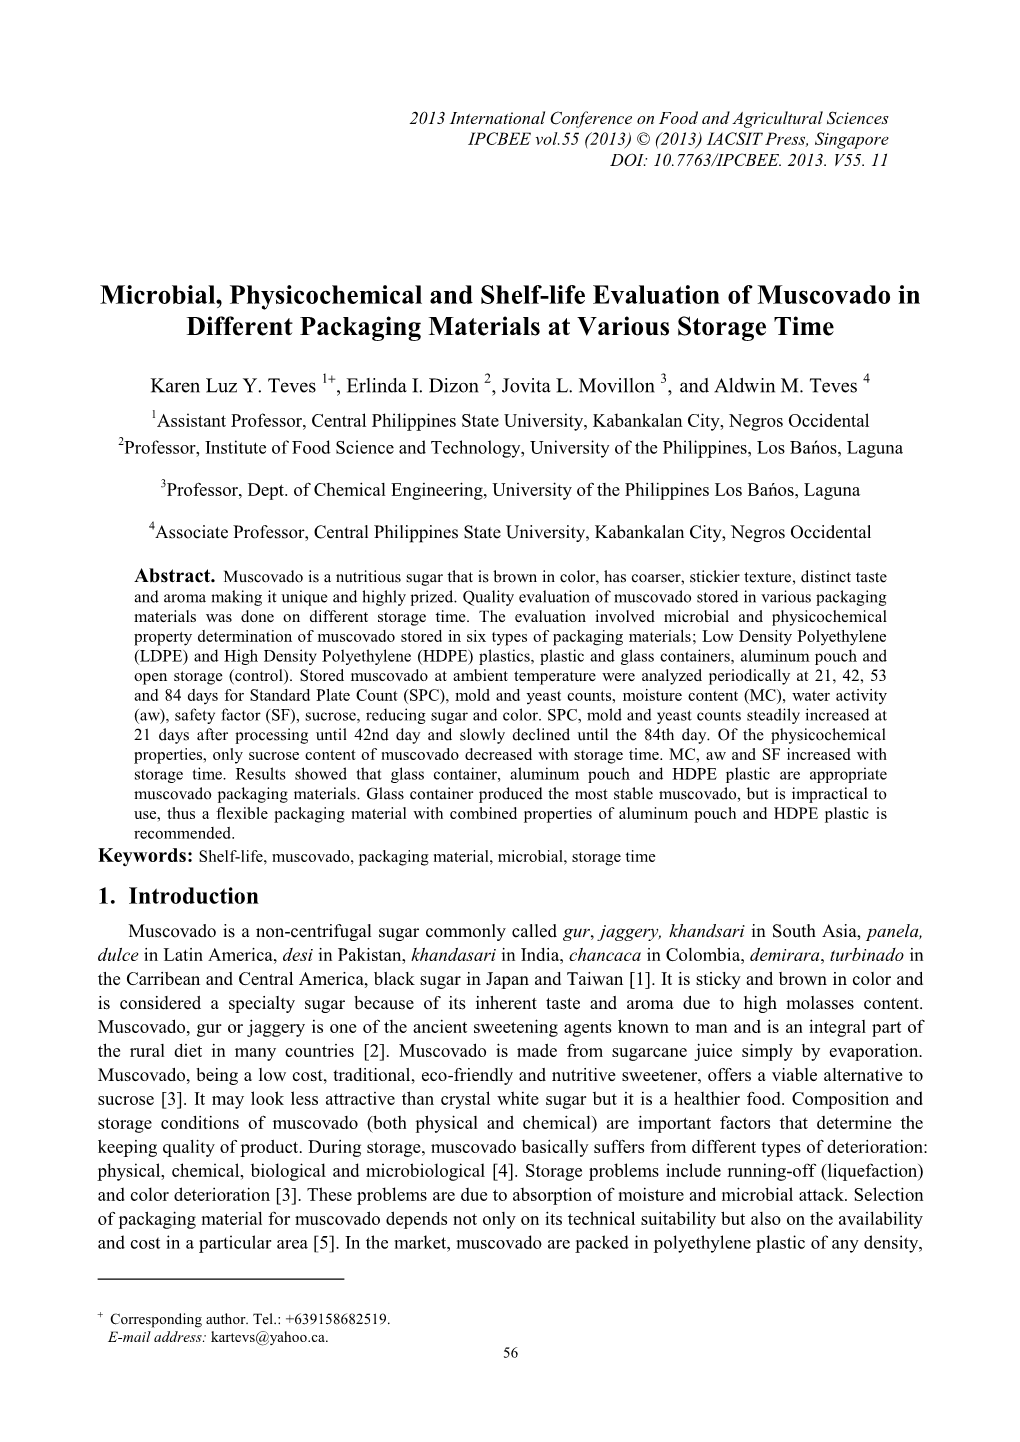 Microbial, Physicochemical and Shelf-Life Evaluation of Muscovado in Different Packaging Materials at Various Storage Time